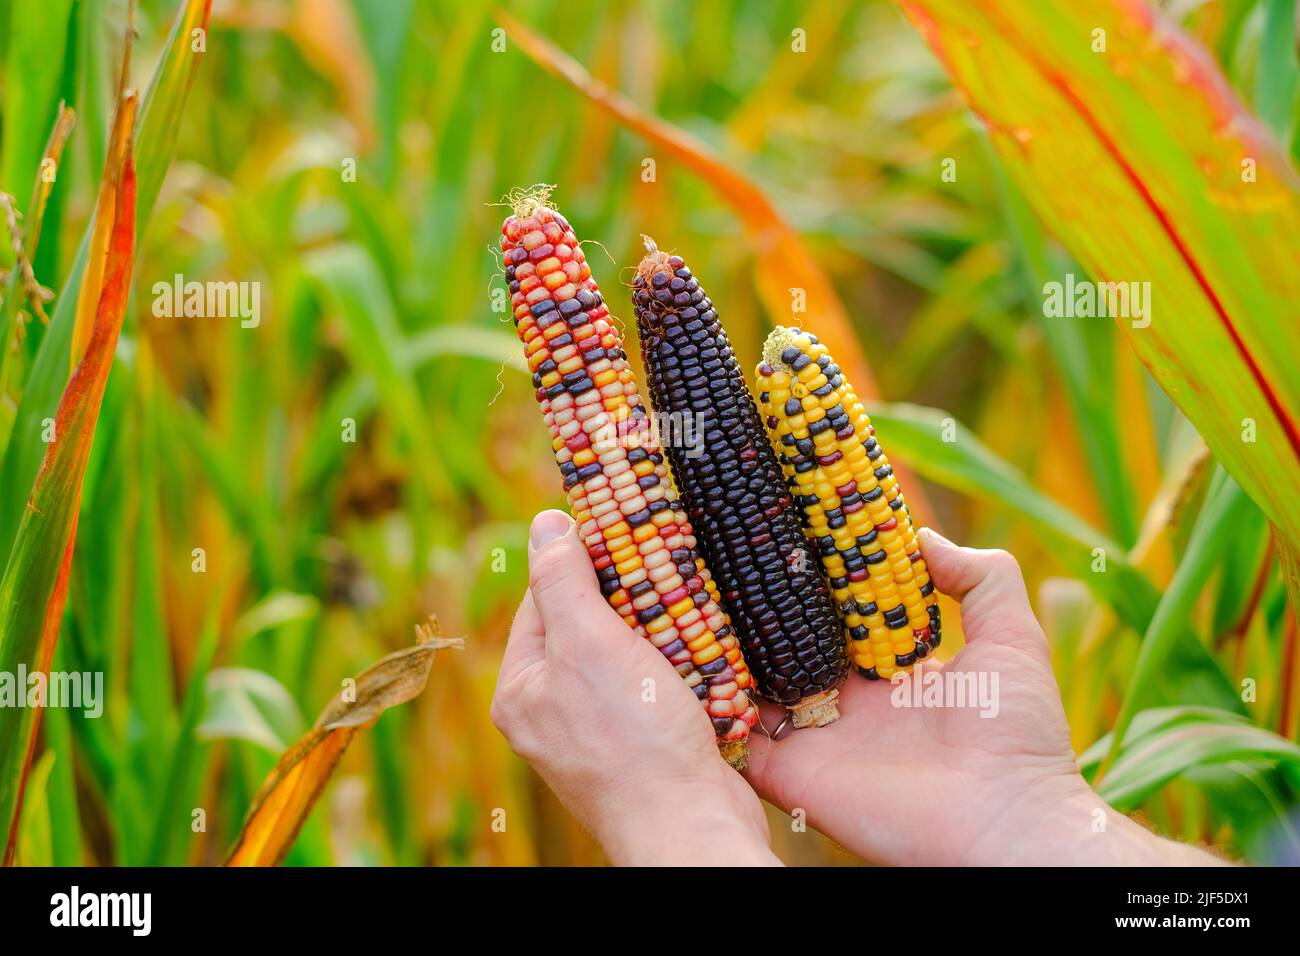 colorful corn.Corn abundance. Cobs of multicolored corn set in male hands close-up.Corn cobs of different colors.Food and food securityAutumn Stock Photo